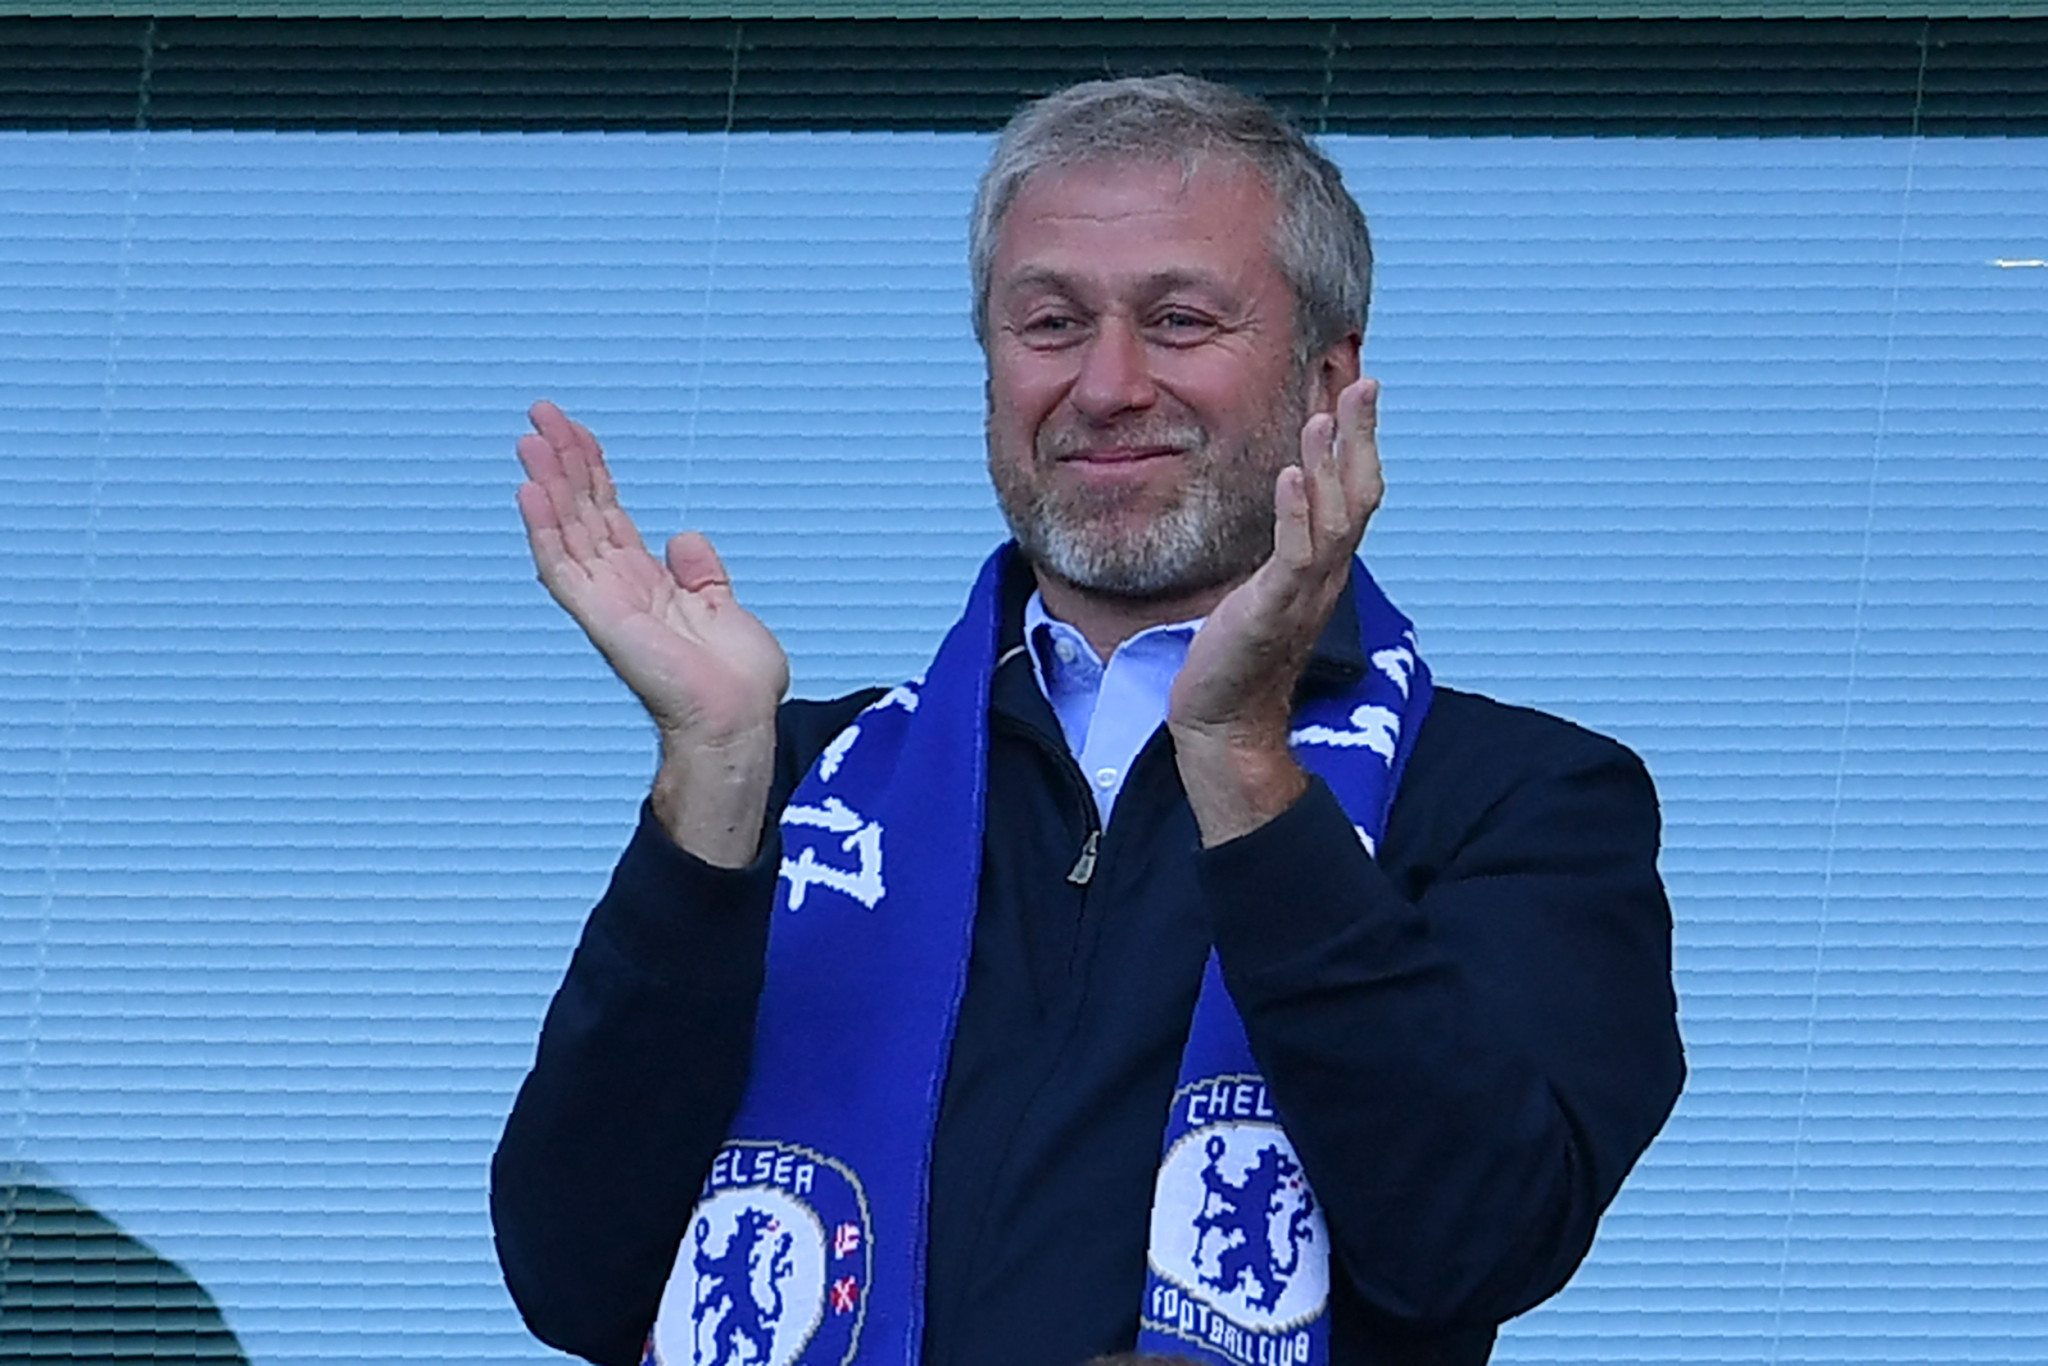 Roman Abramovich has announced that Chelsea Football Club is for sale ©Getty Images